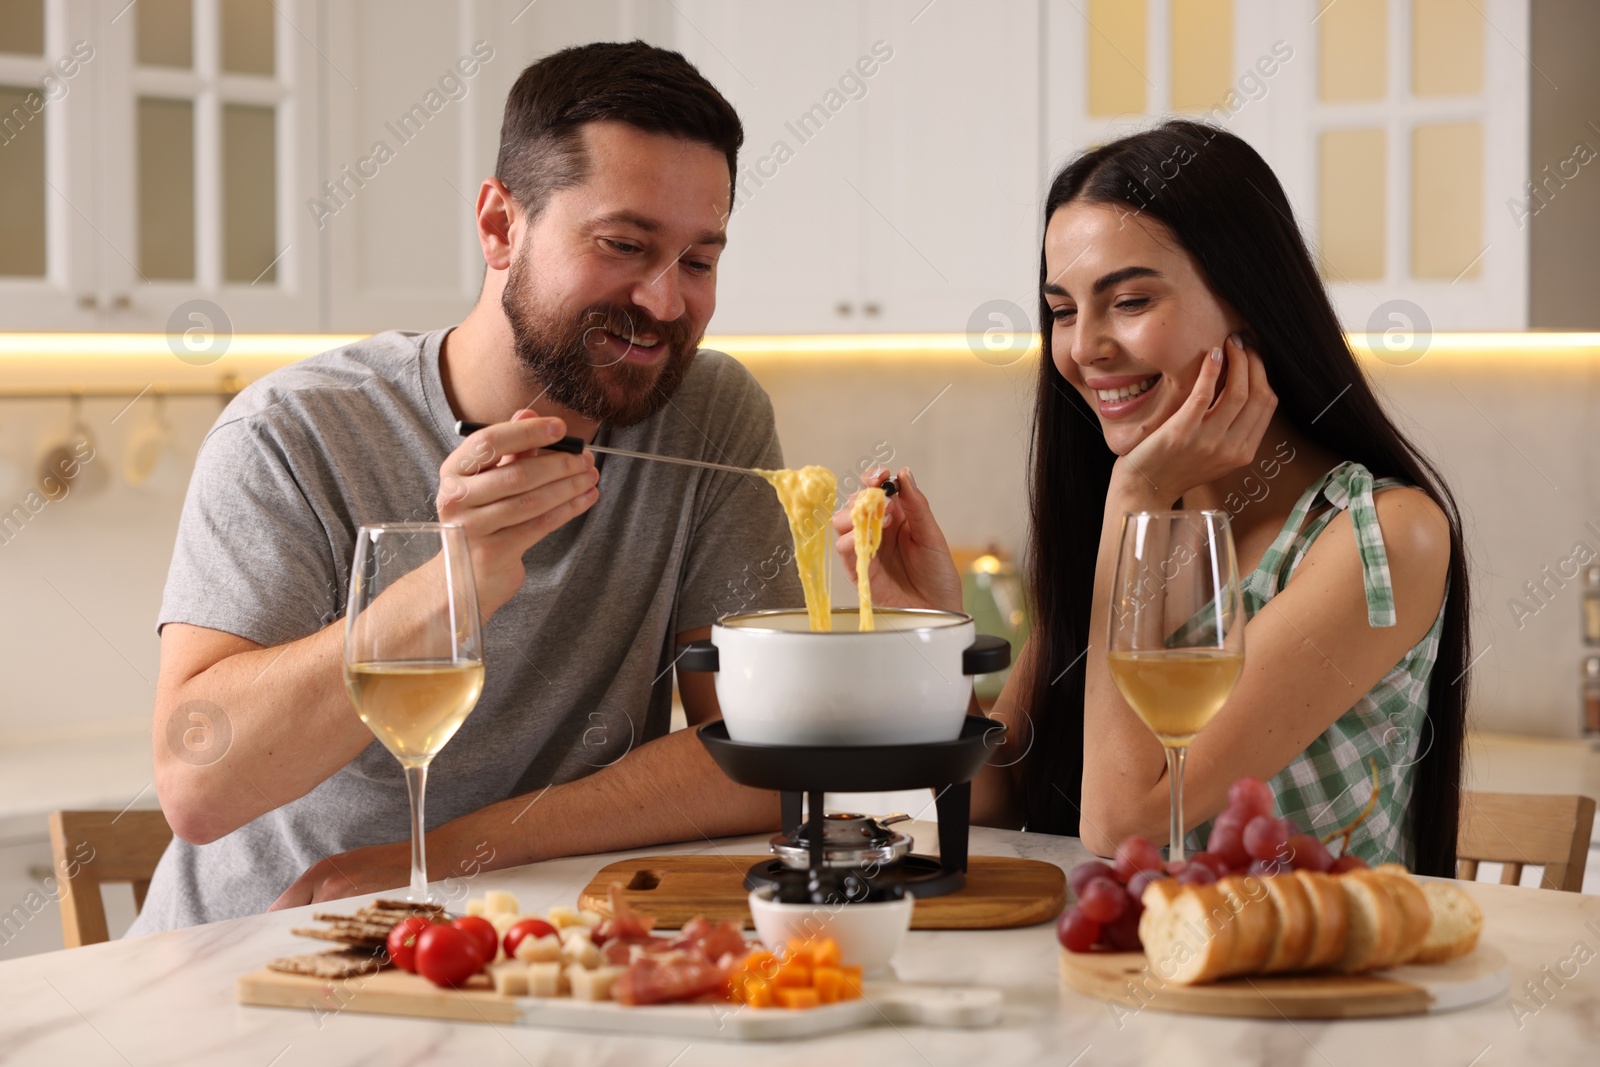 Photo of Affectionate couple enjoying cheese fondue during romantic date in kitchen